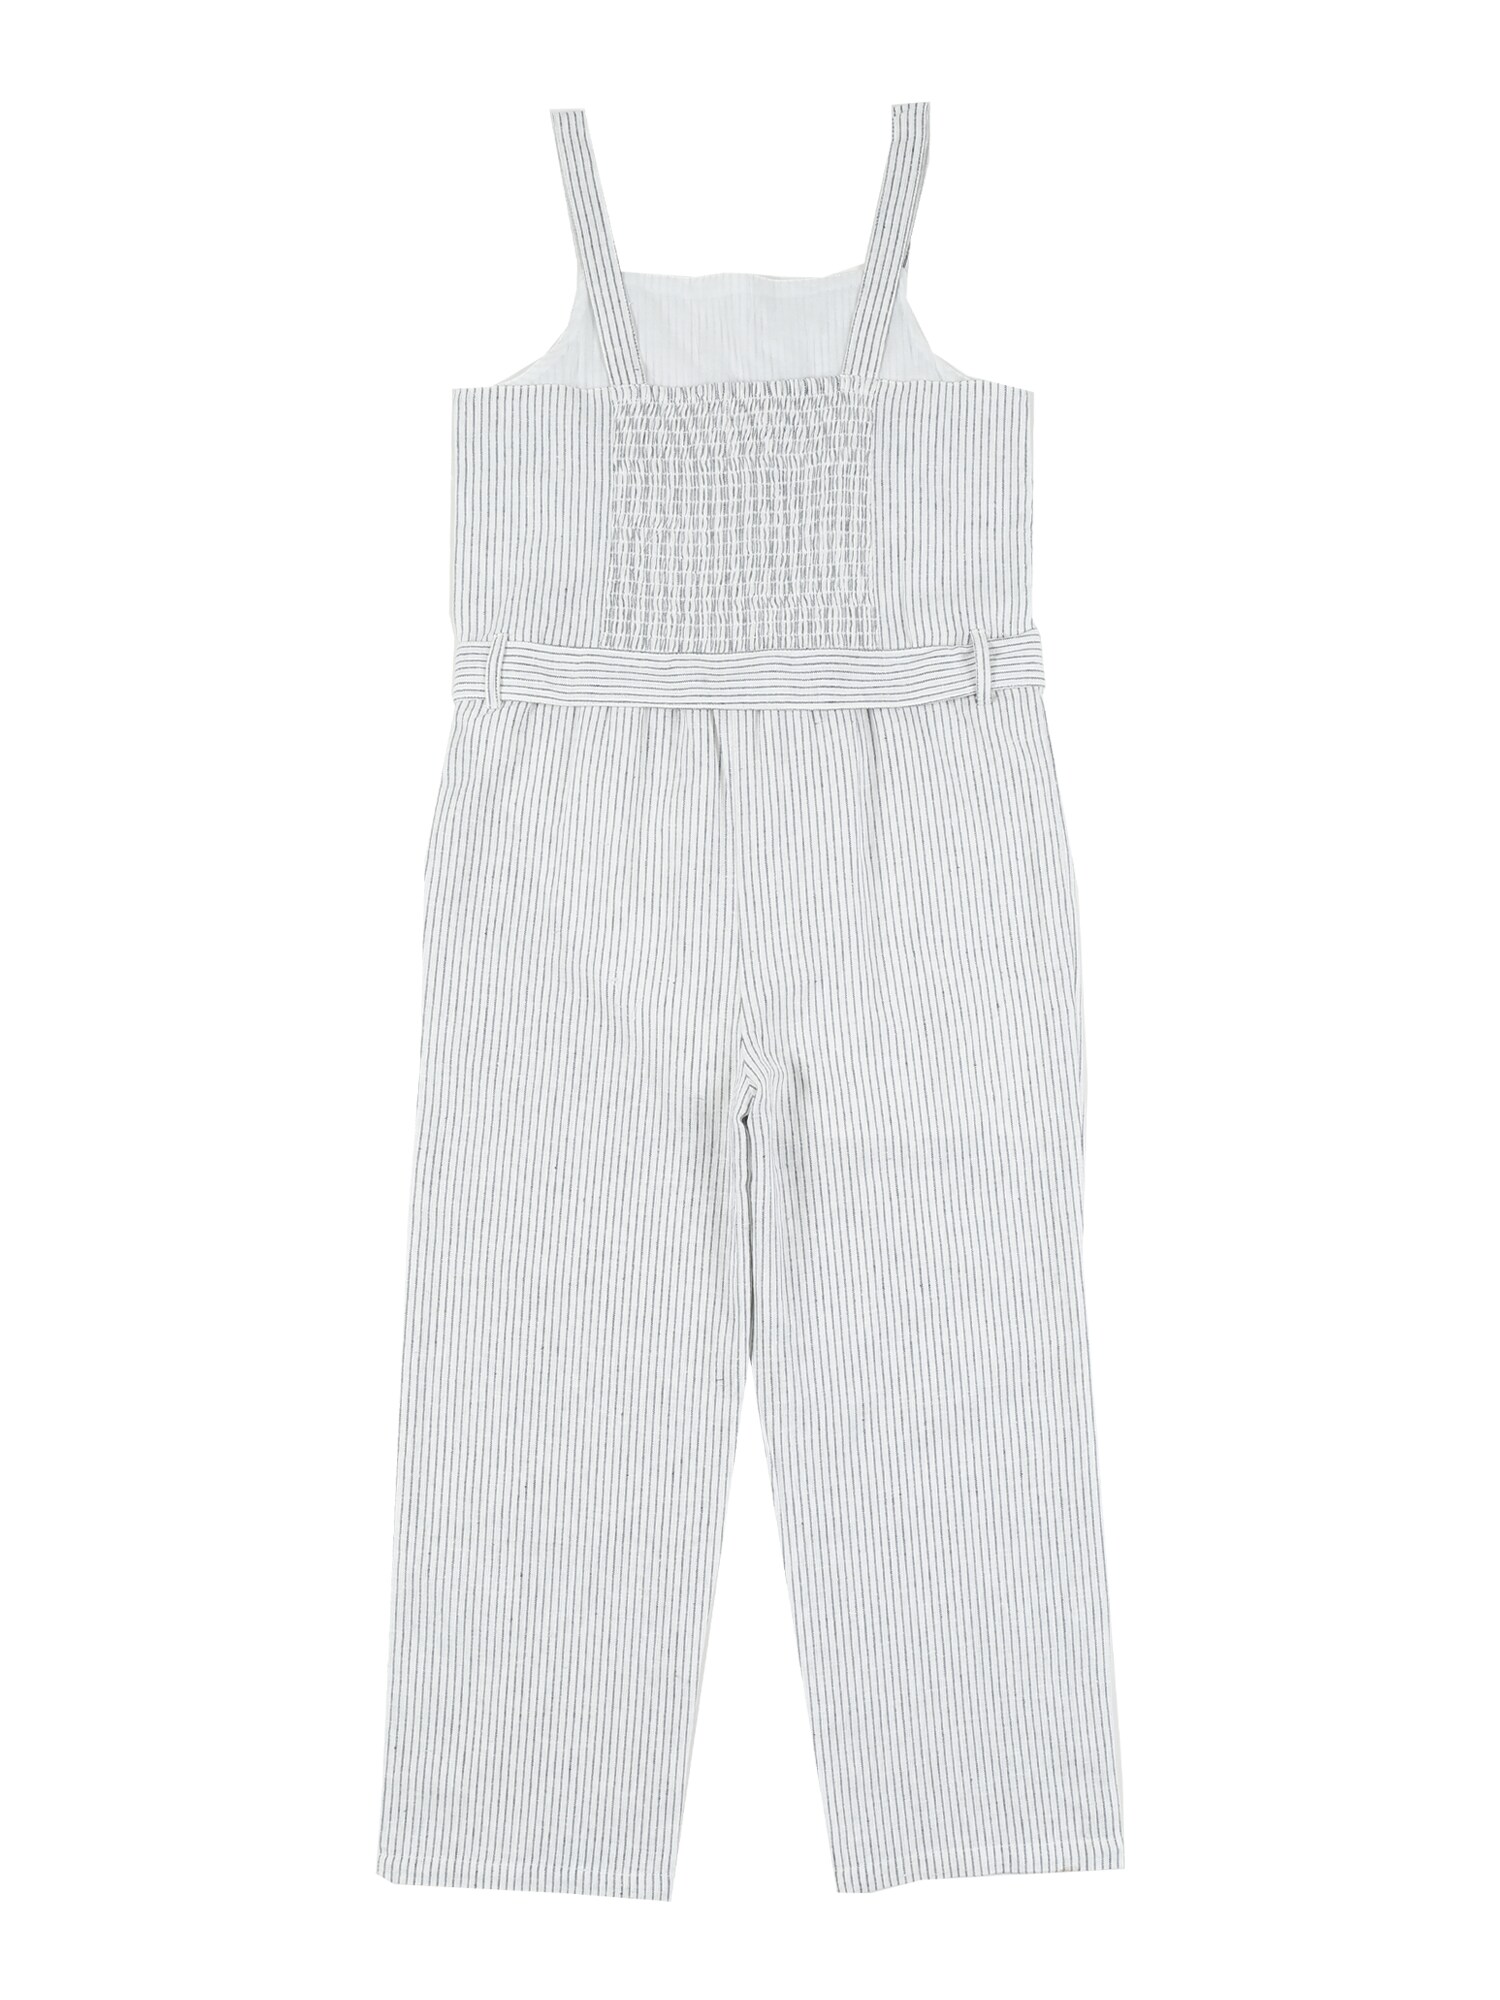 KIDS ONLY Overall  grey